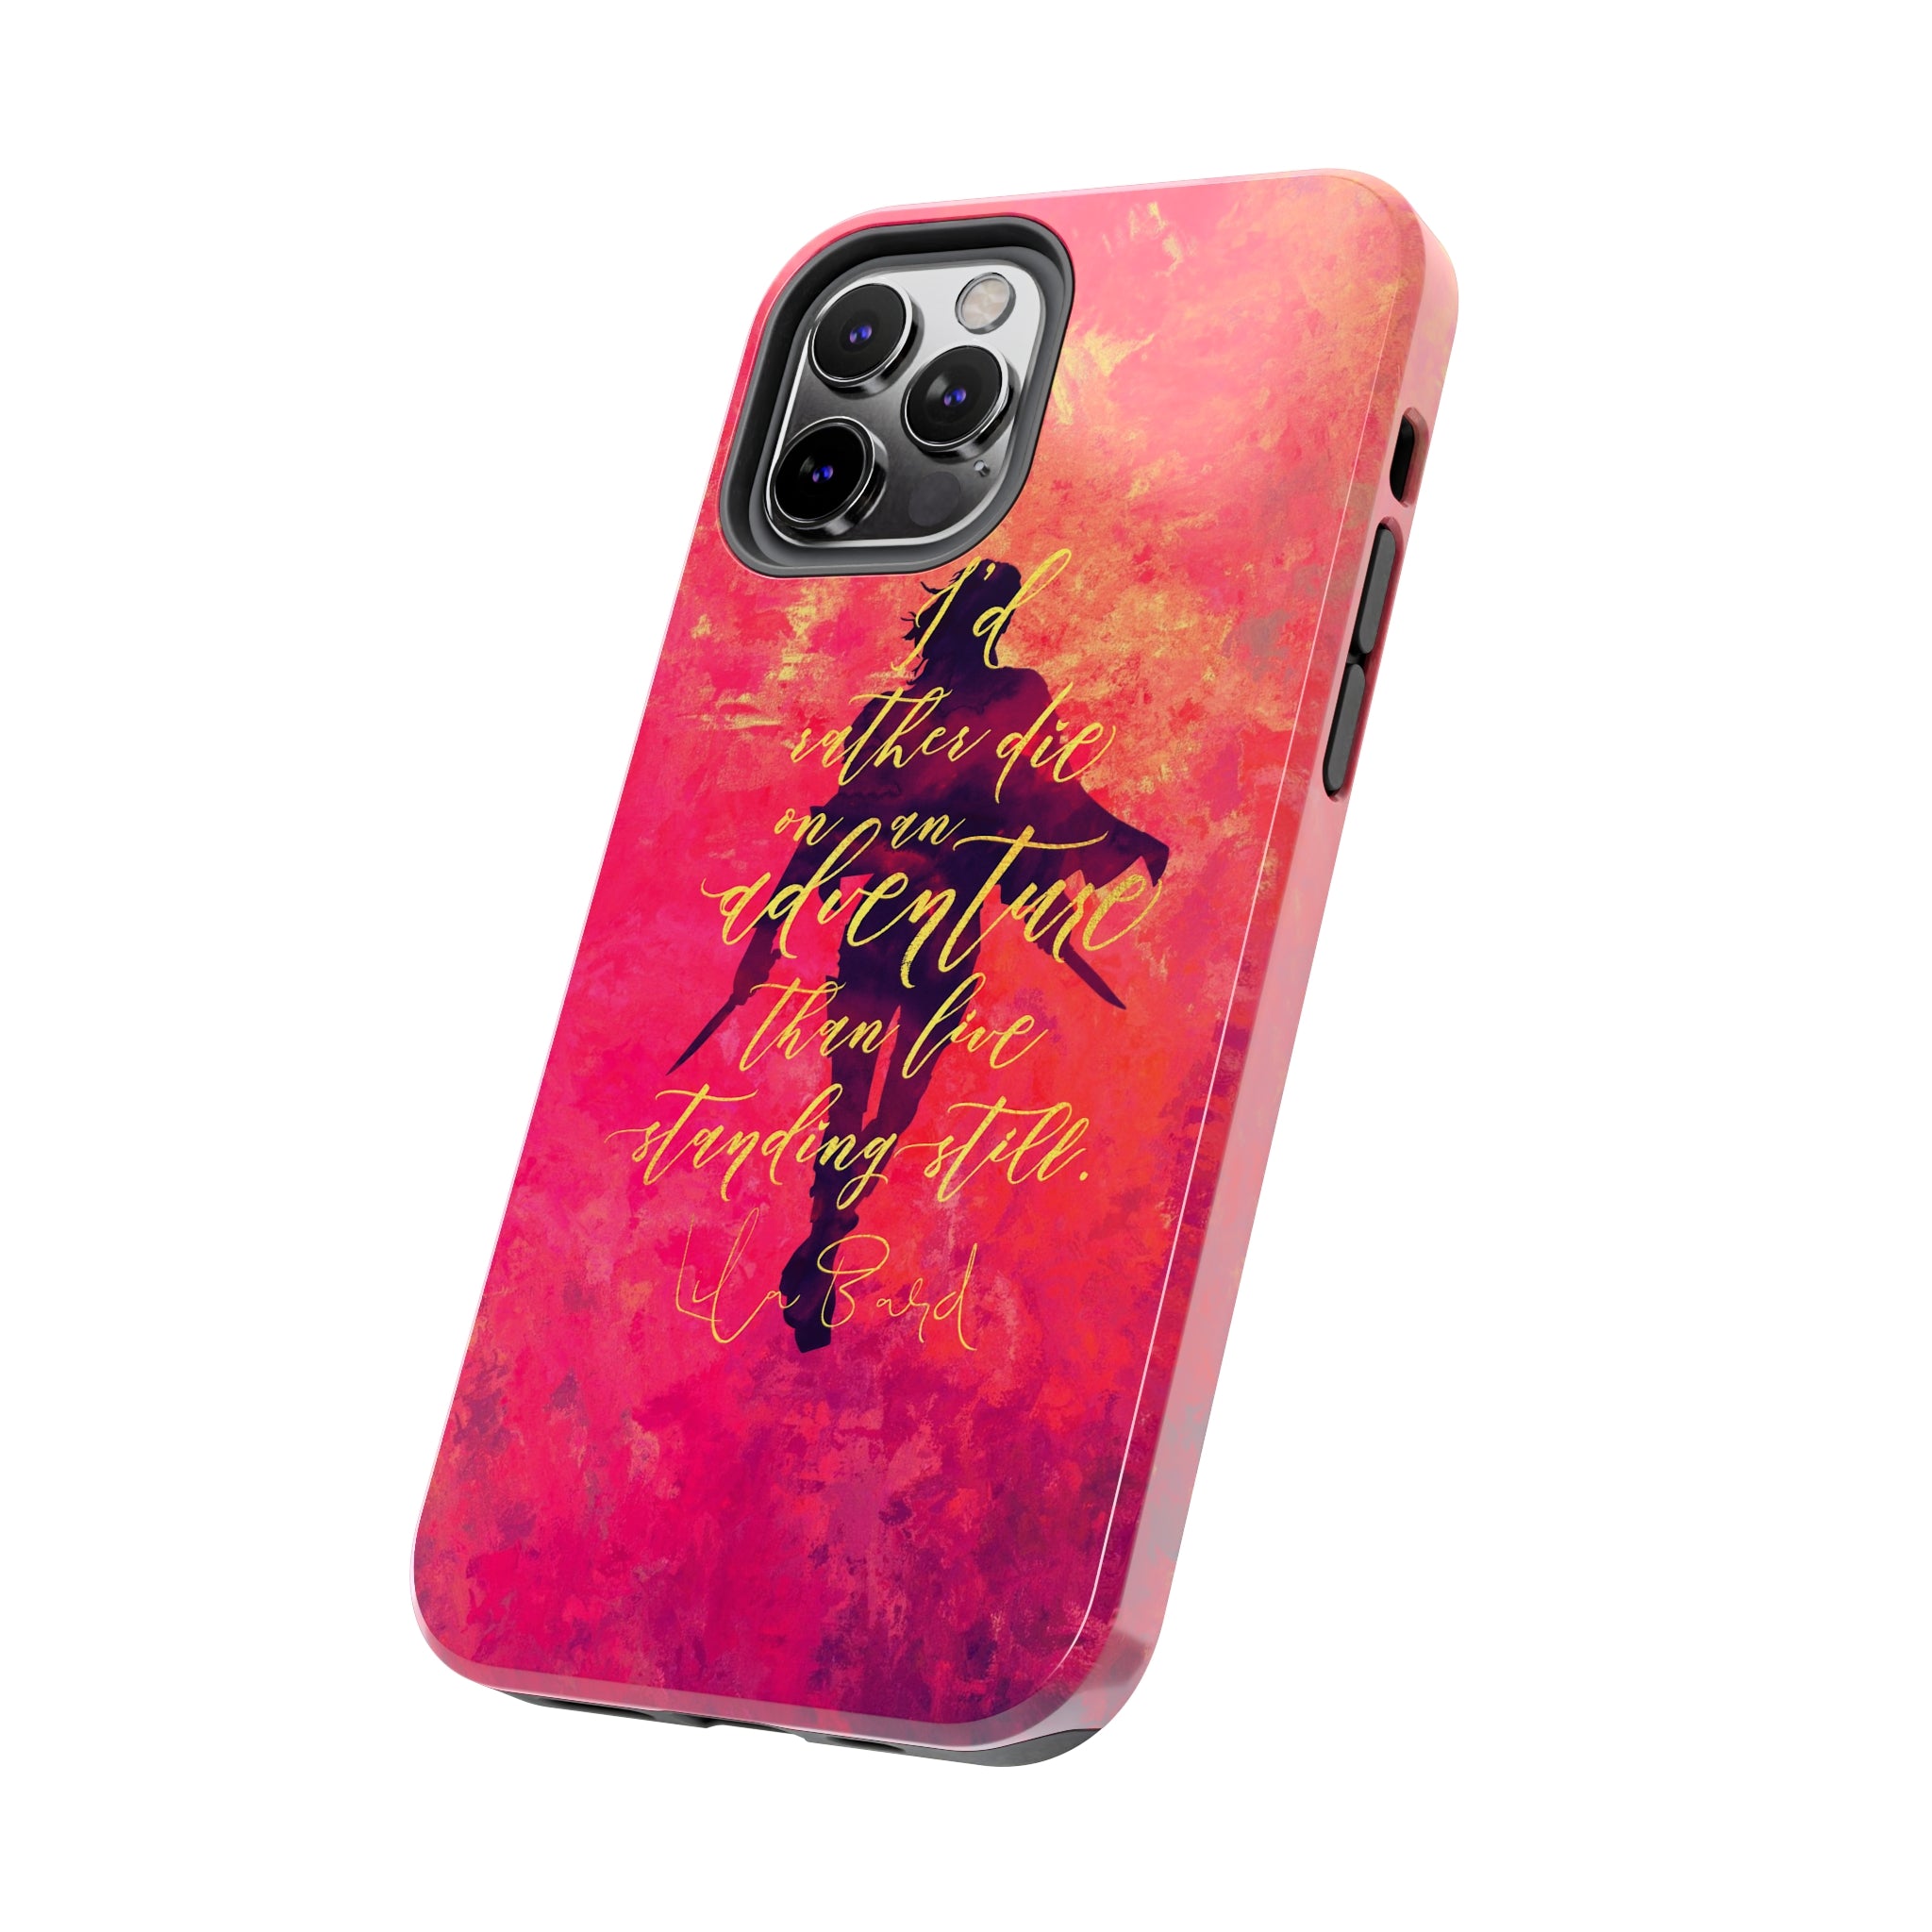 I'd rather die on an adventure... Lila Bard. ADSOM Tough iPhone Case